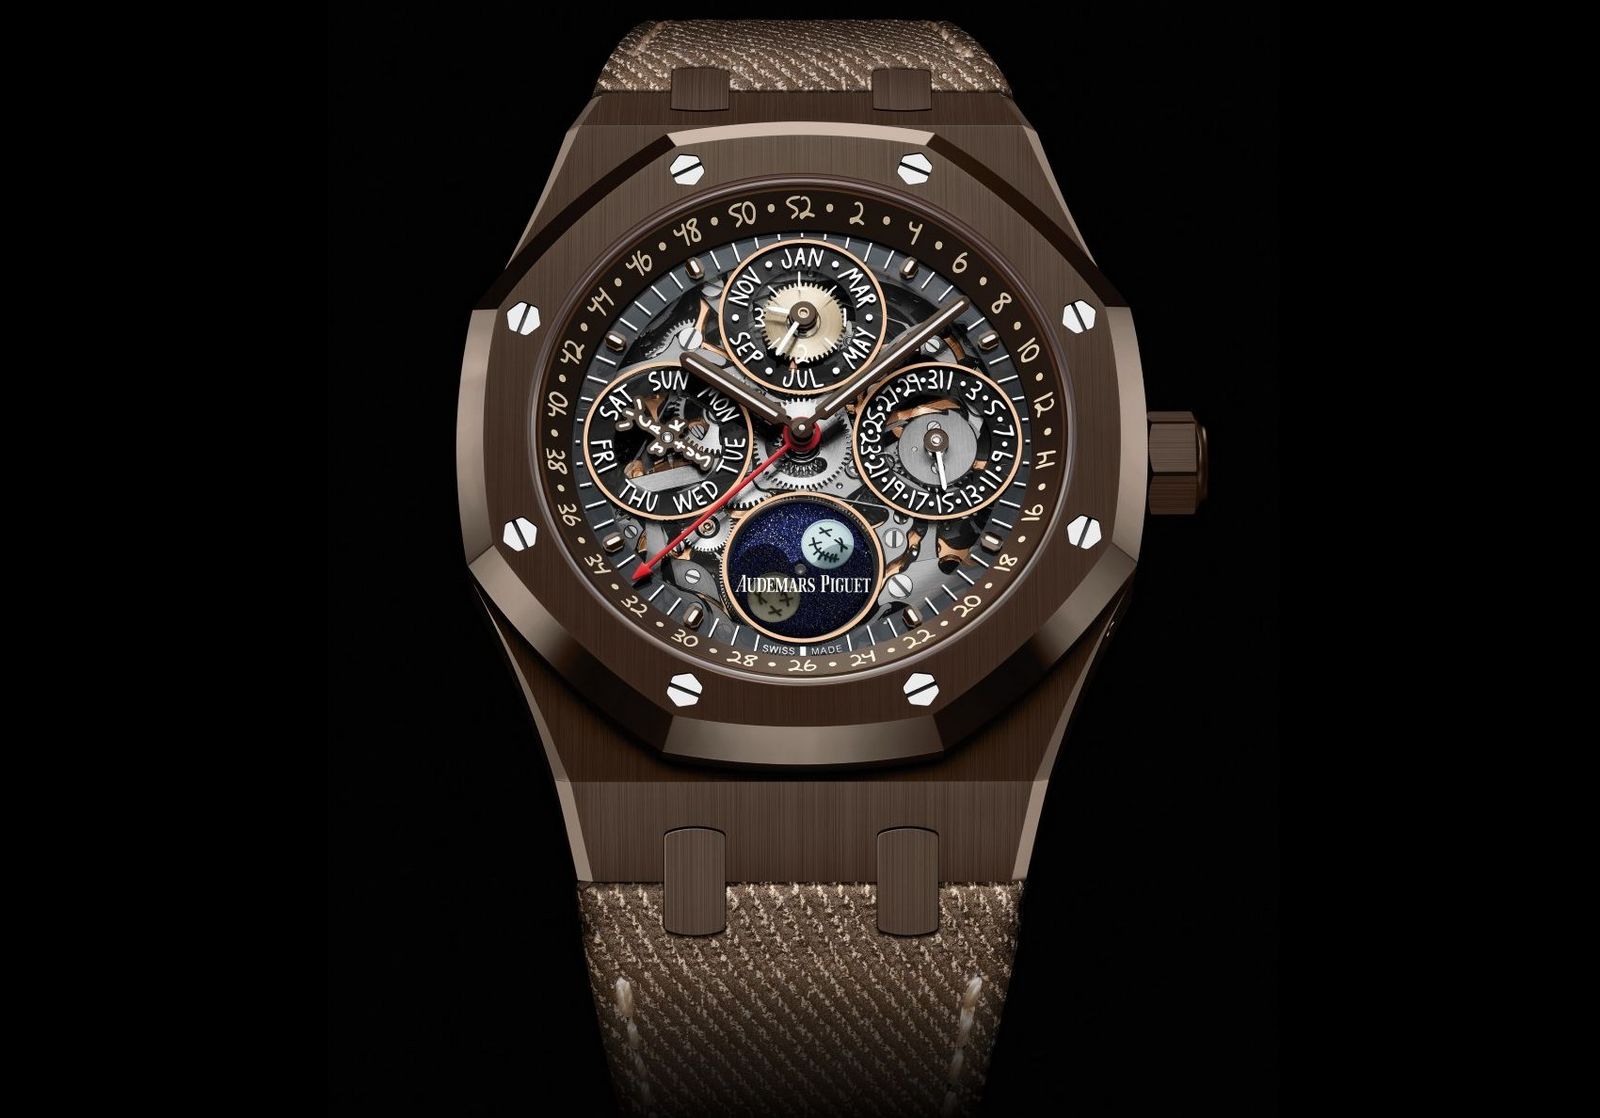 Audemars Piguet has collaborated with American rapper Travis Scott to